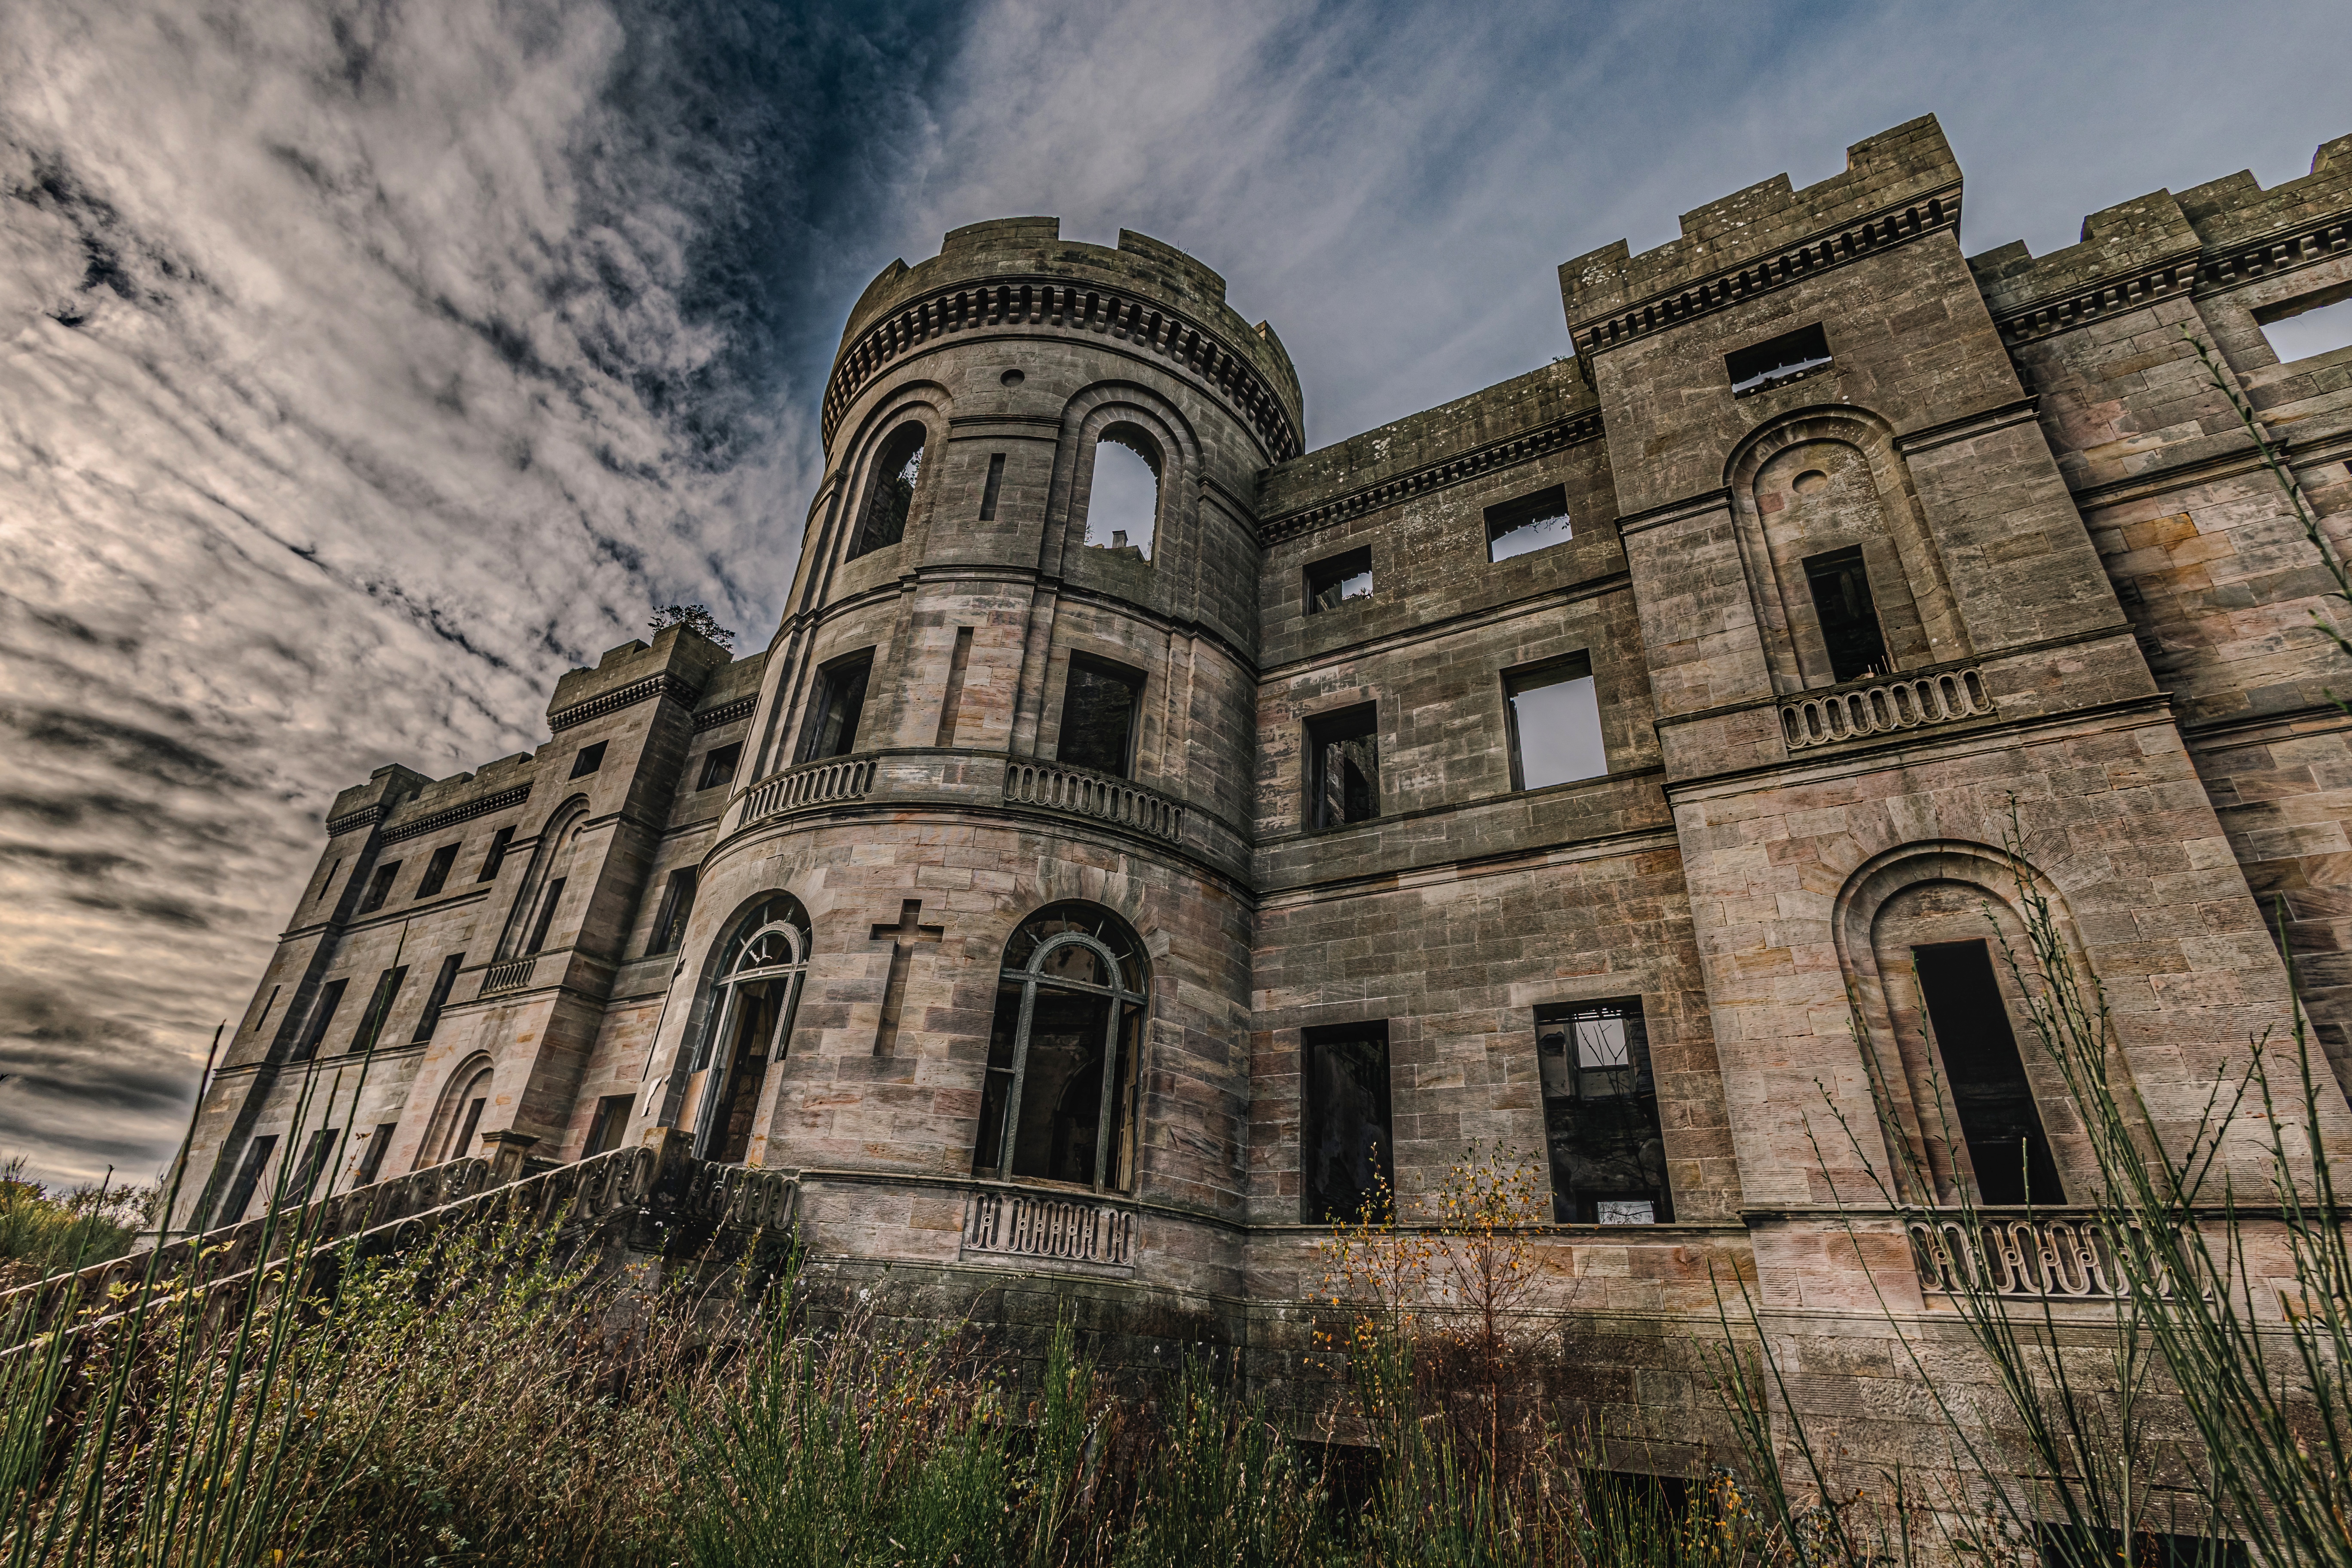 'Fascinating' abandoned castle in a UK forest near 'little Peru'